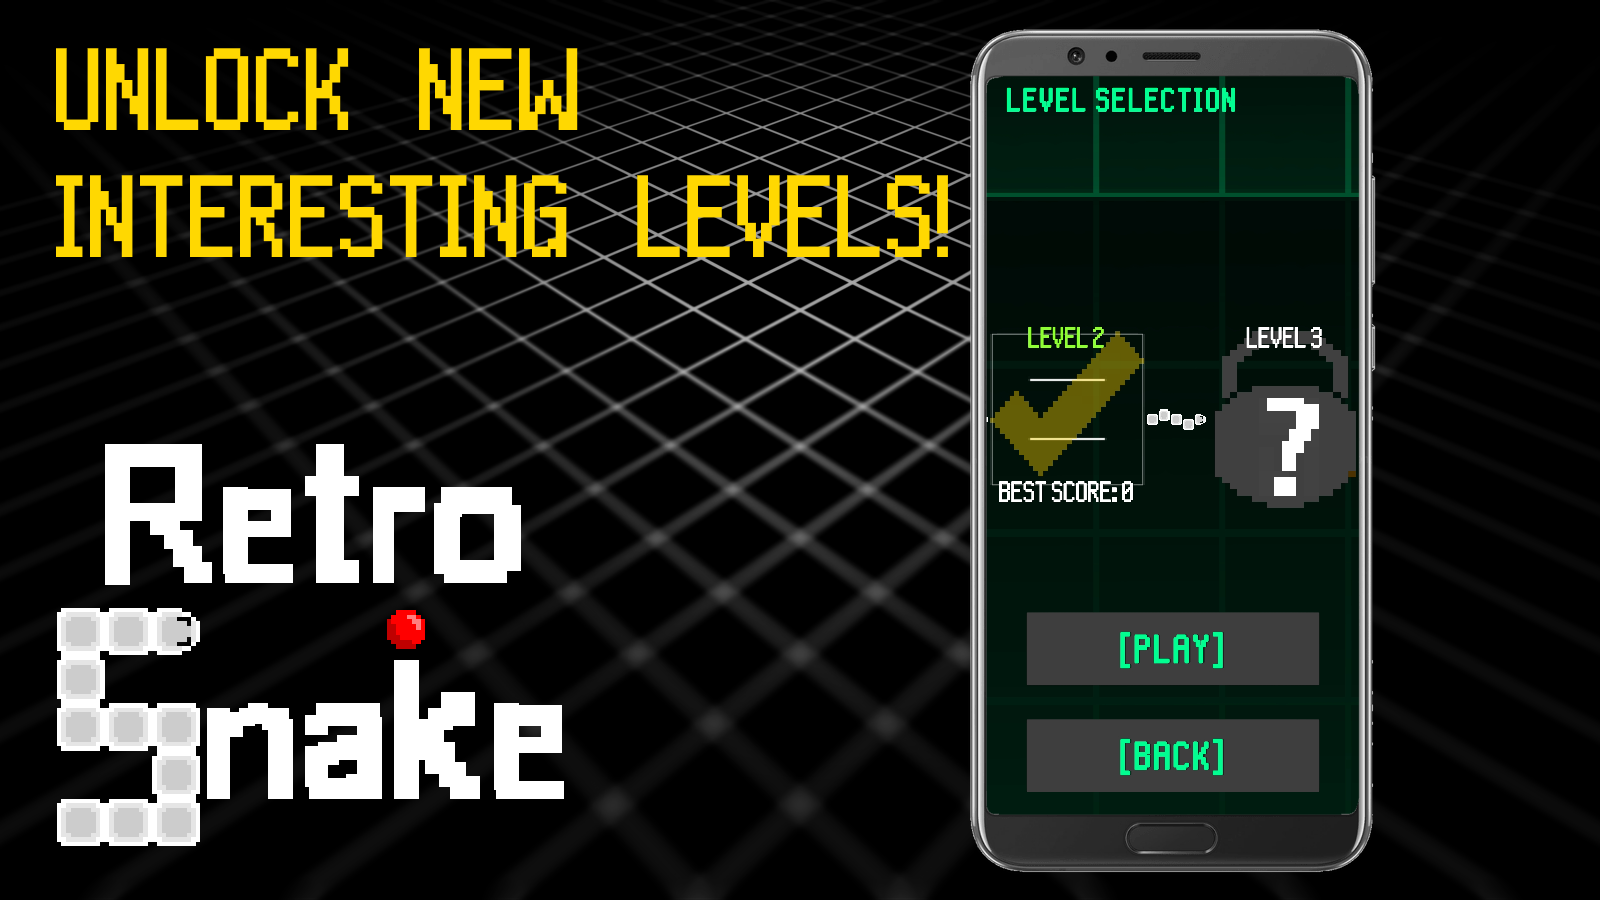 Snake 2 Game Of Retro Nokia Phones Snake II Games Android Gameplay 